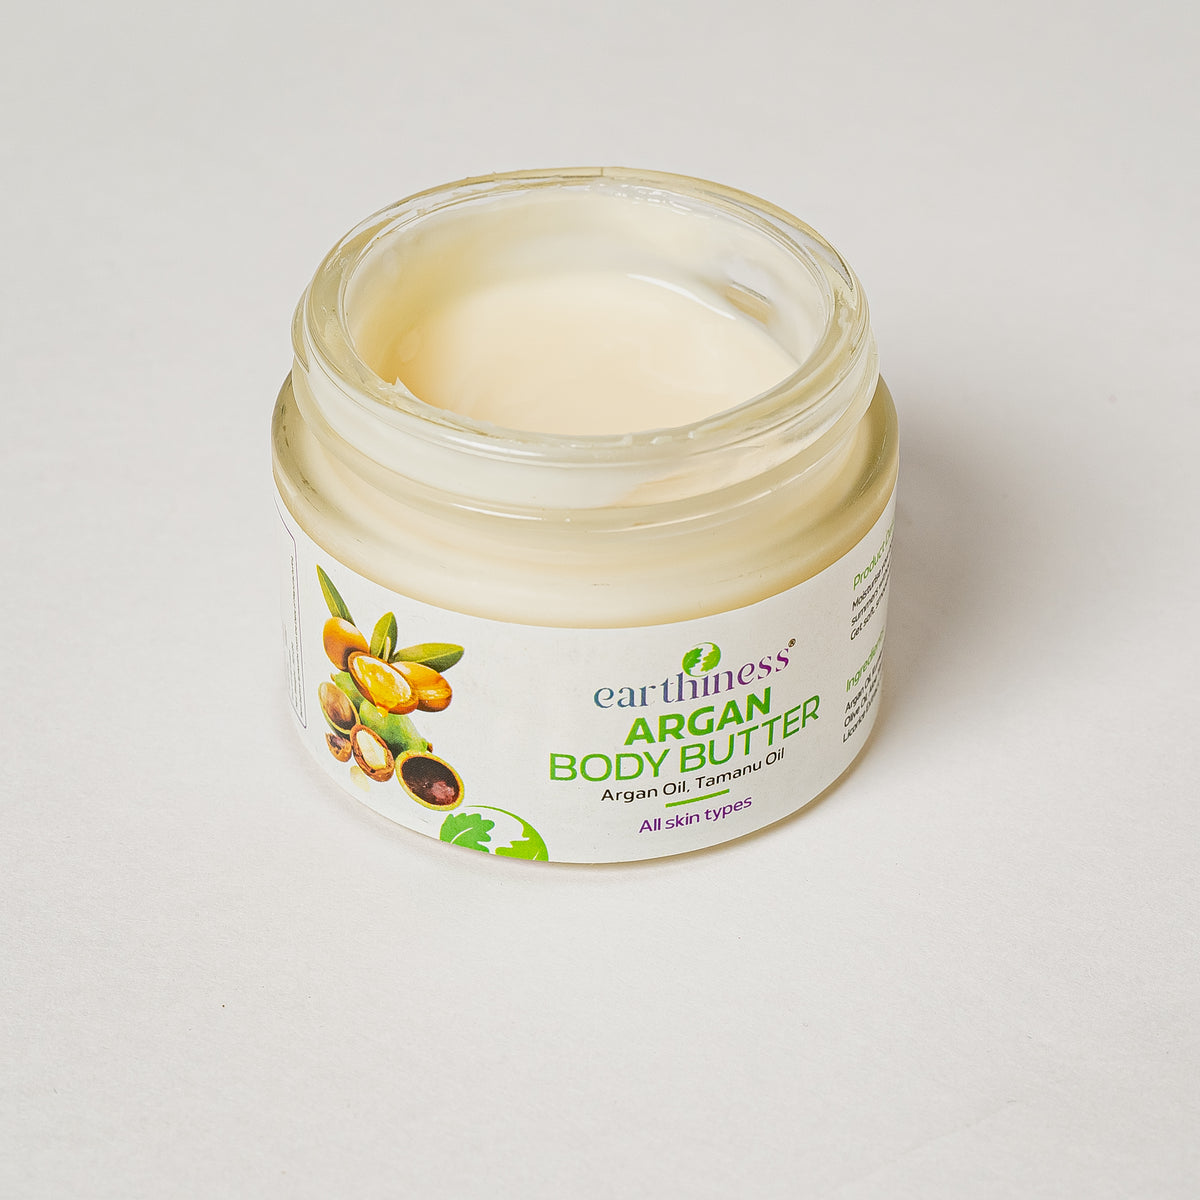 Argan Body Butter with Argan Oil & Tamanu Oil For Smooth & Supple Skin